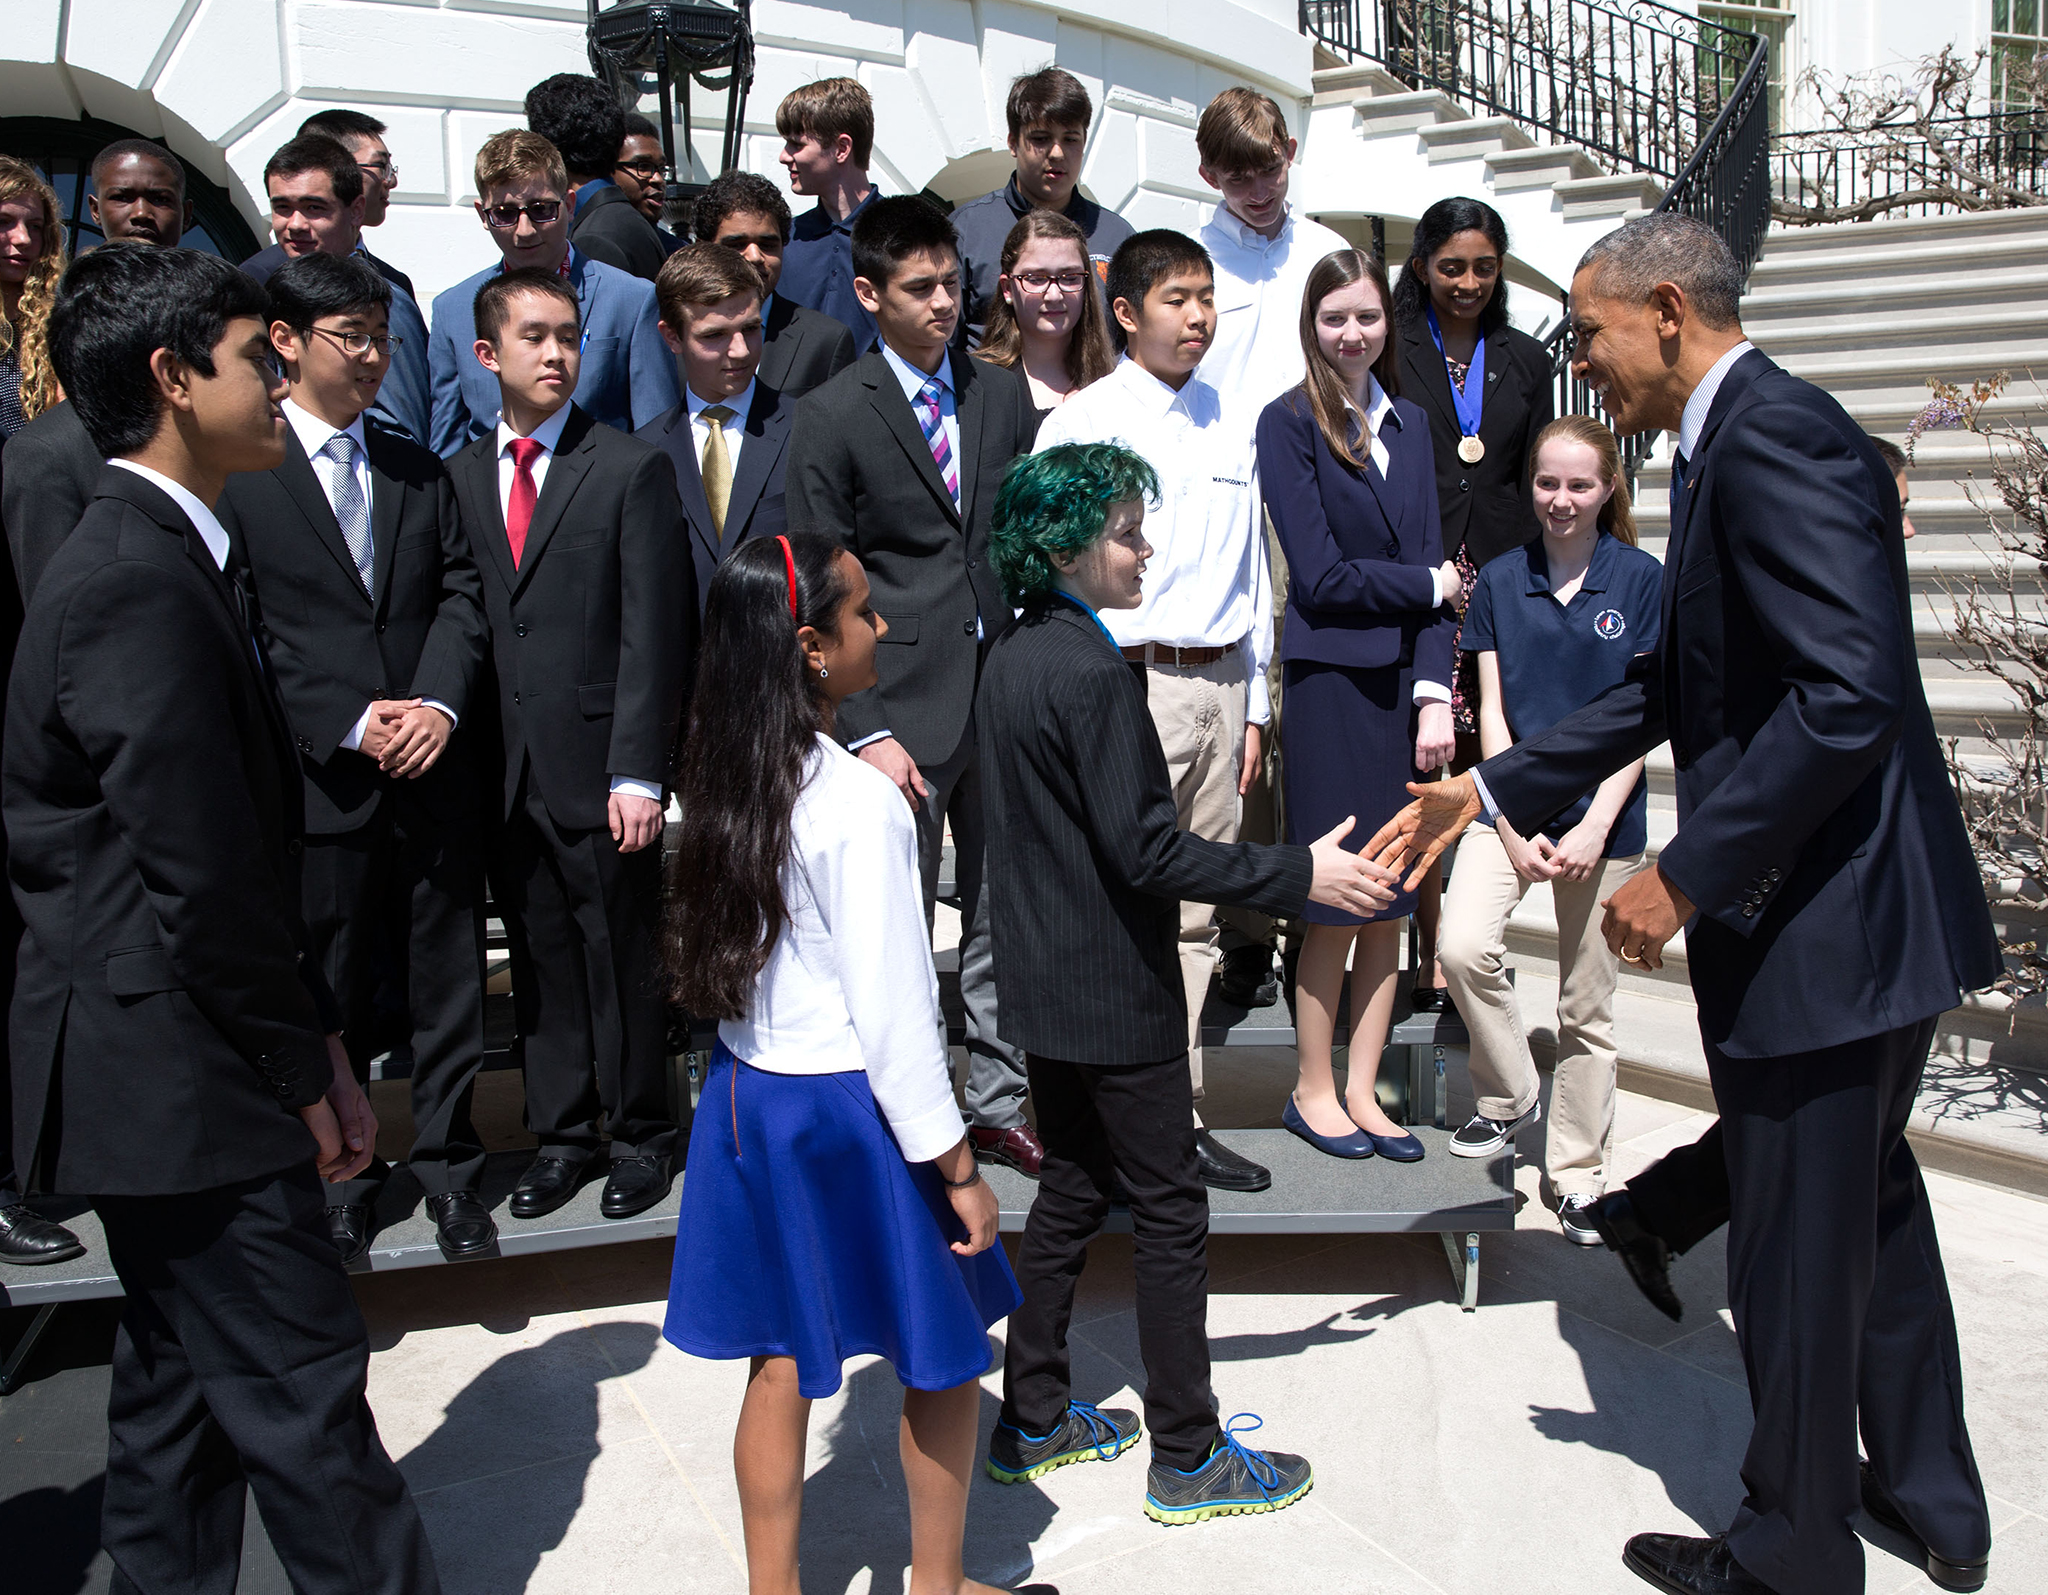 President Obama greets White House Science Fair participants